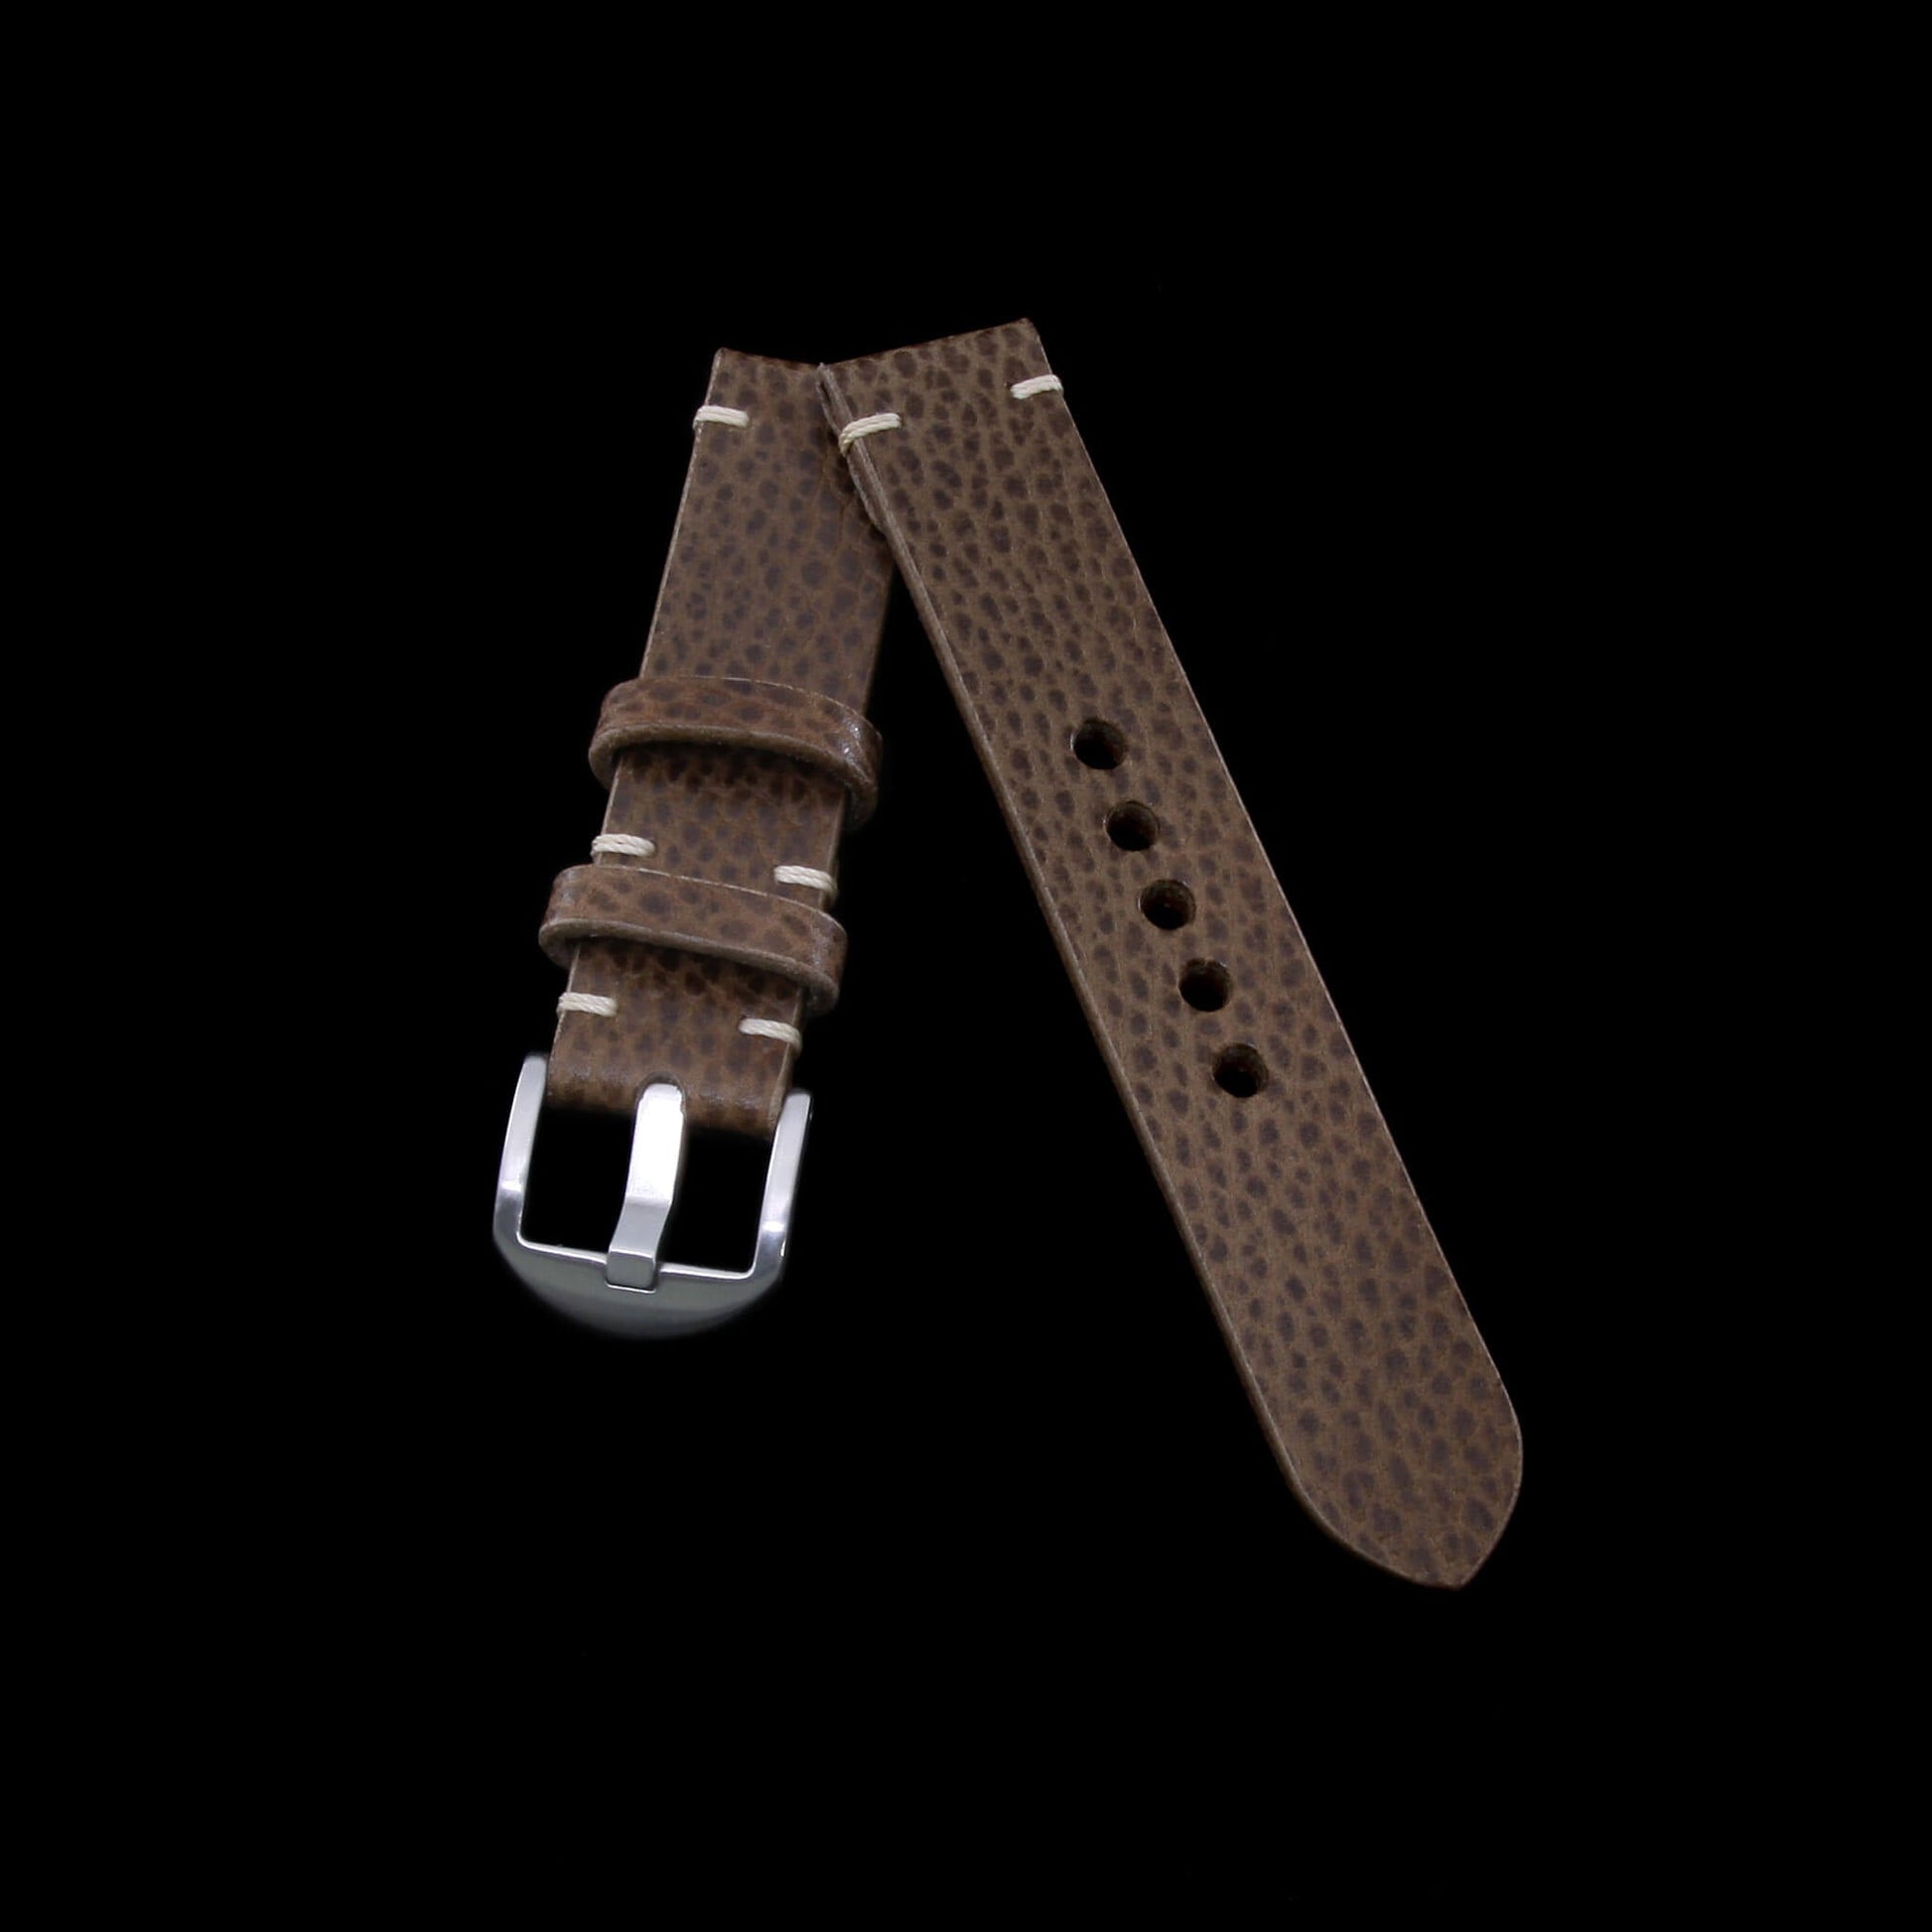 Sleek and sophisticated: 2-piece minimalist Apple Watch strap in luxurious Buttero Taupe Italian leather, handcrafted by Cozy Handmade.